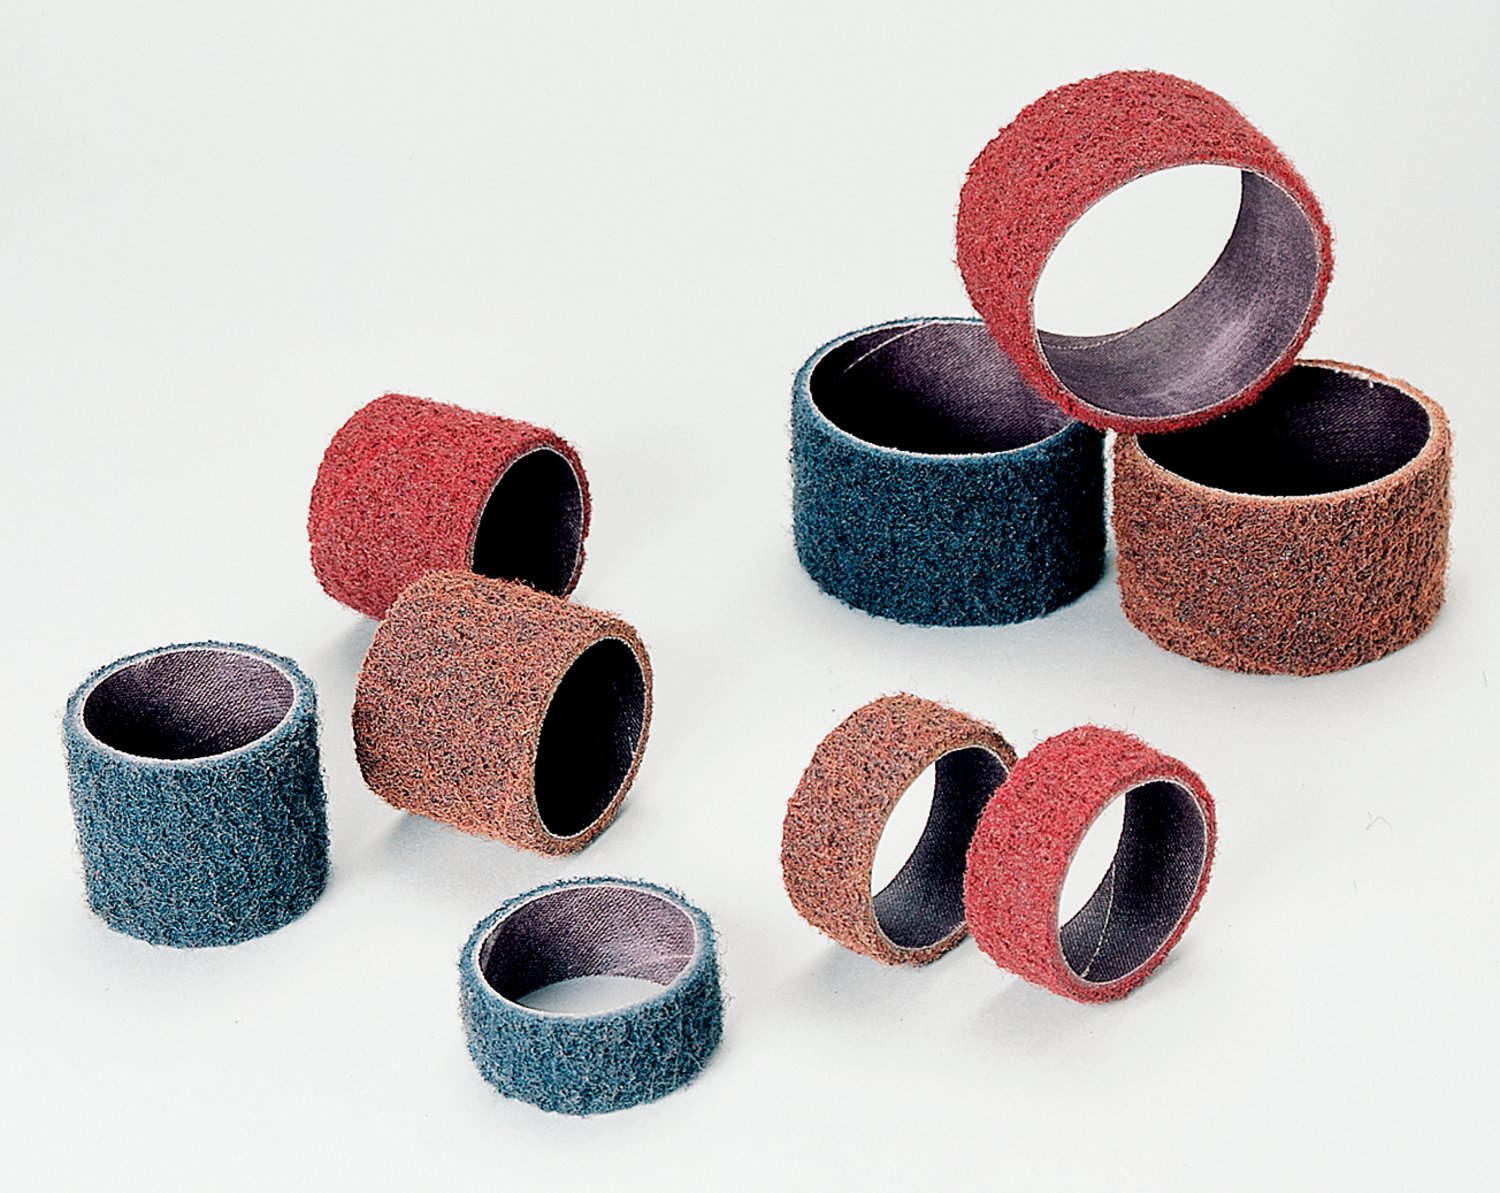 7010368748 - Standard Abrasives Surface Conditioning Band 727091, 1-1/2 in x 1 in
VFN, 10/Carton, 100 ea/Case